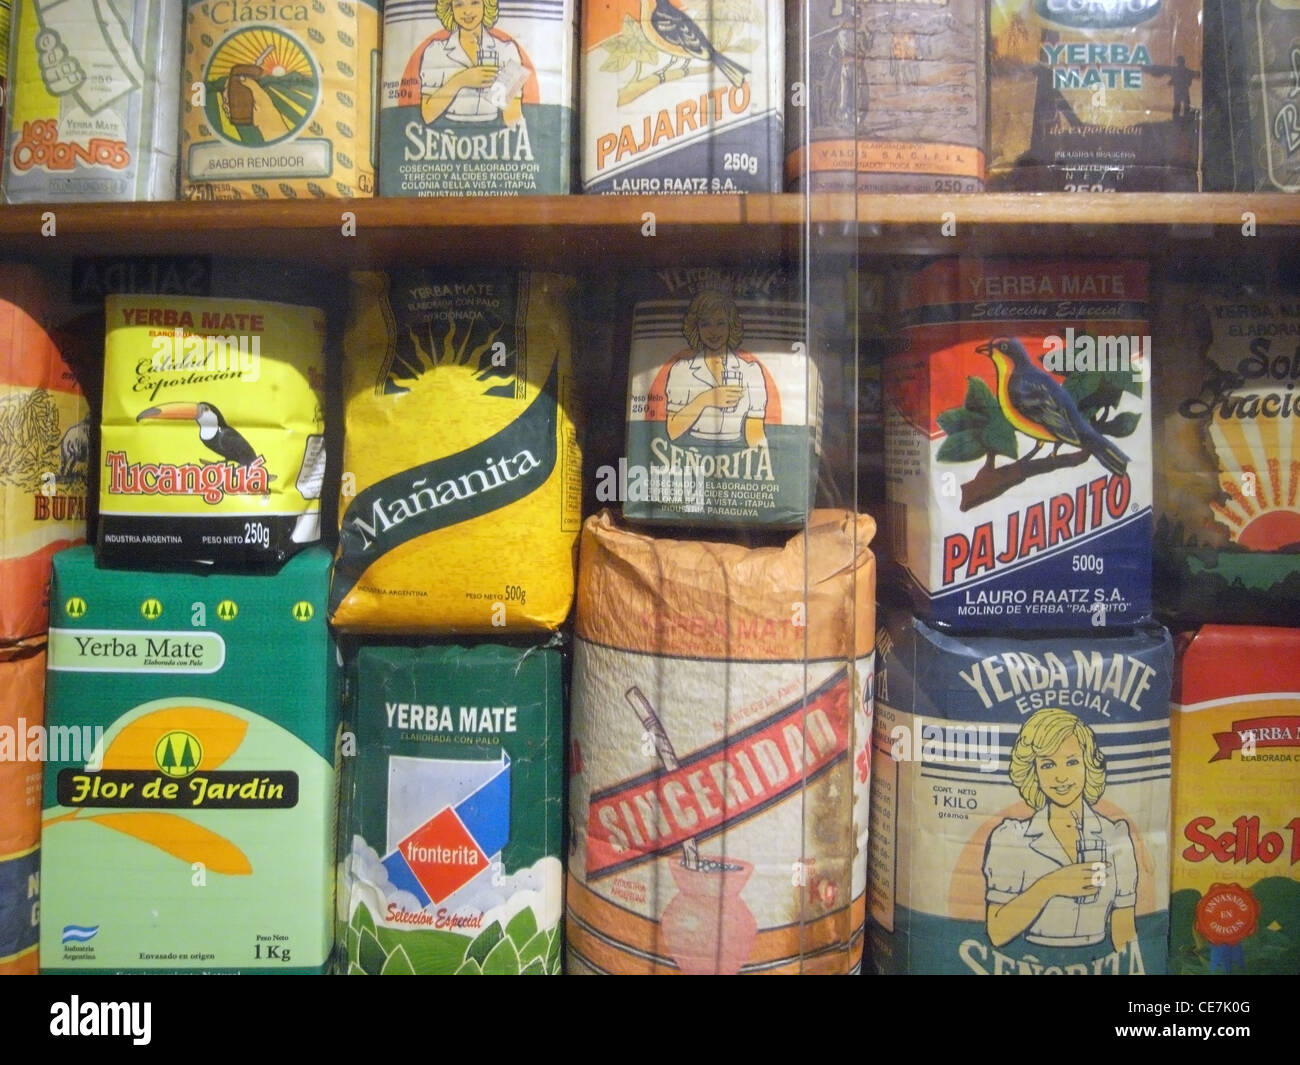 Many antique brands of yerba mate on display in the Museo del Mate, Tigre, north of Buenos Aires, Argentina. No PR Stock Photo